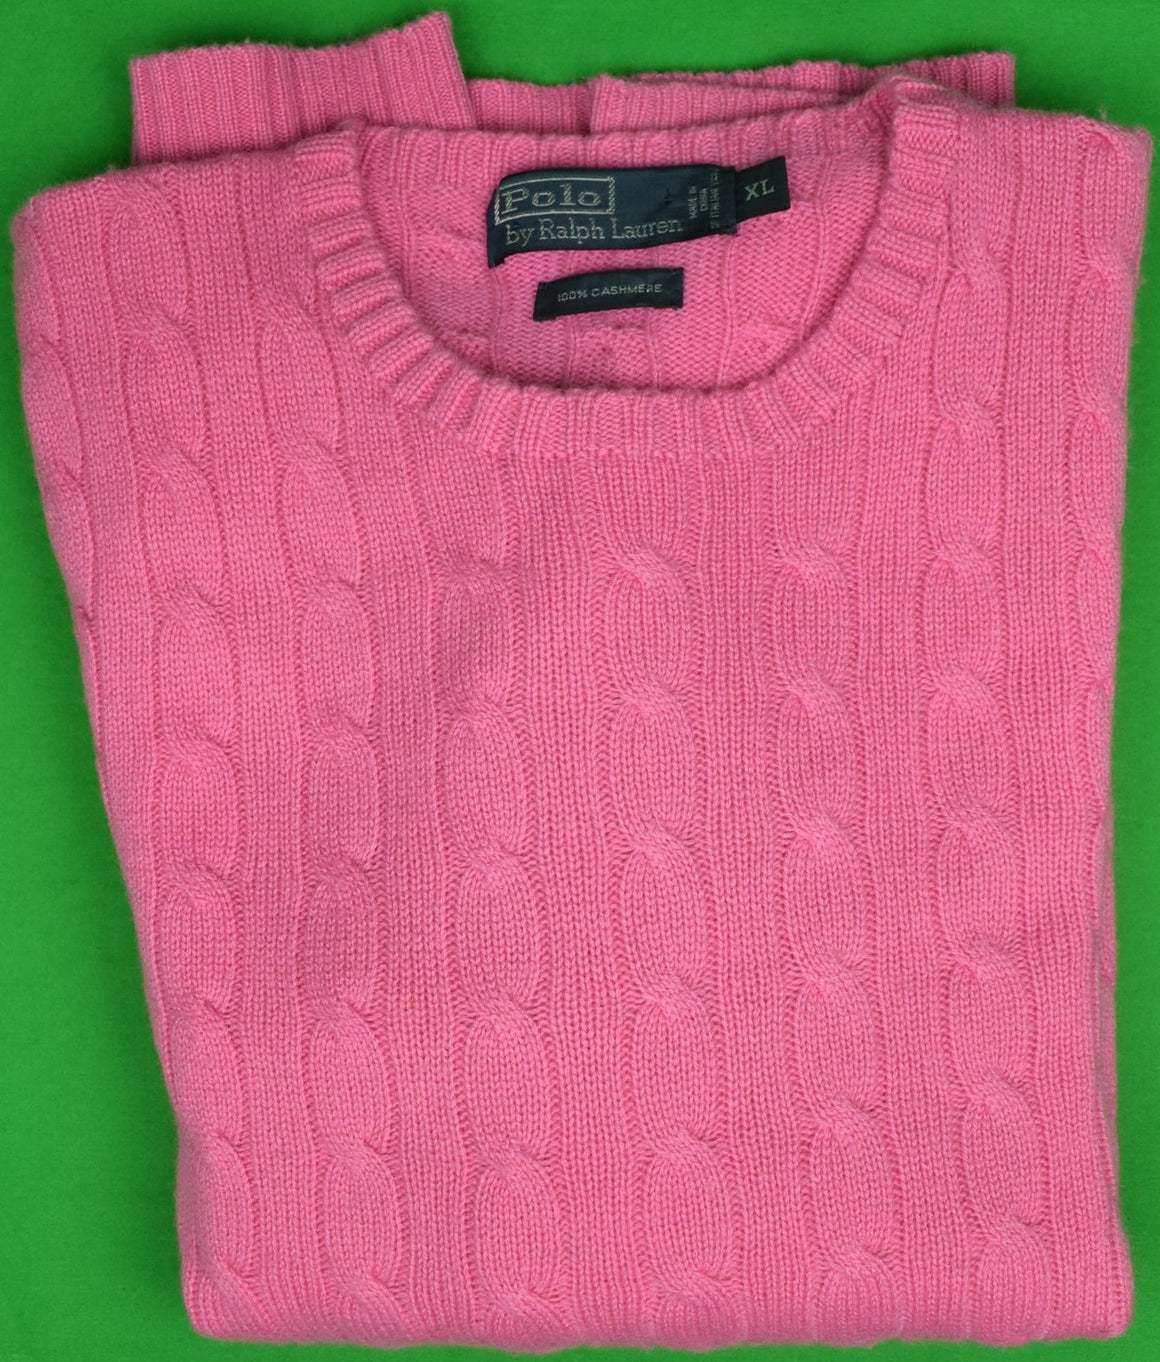 "Polo by Ralph Lauren 100% Hot Pink Cashmere Cable Crewneck Sweater" Sz: XL (SOLD)